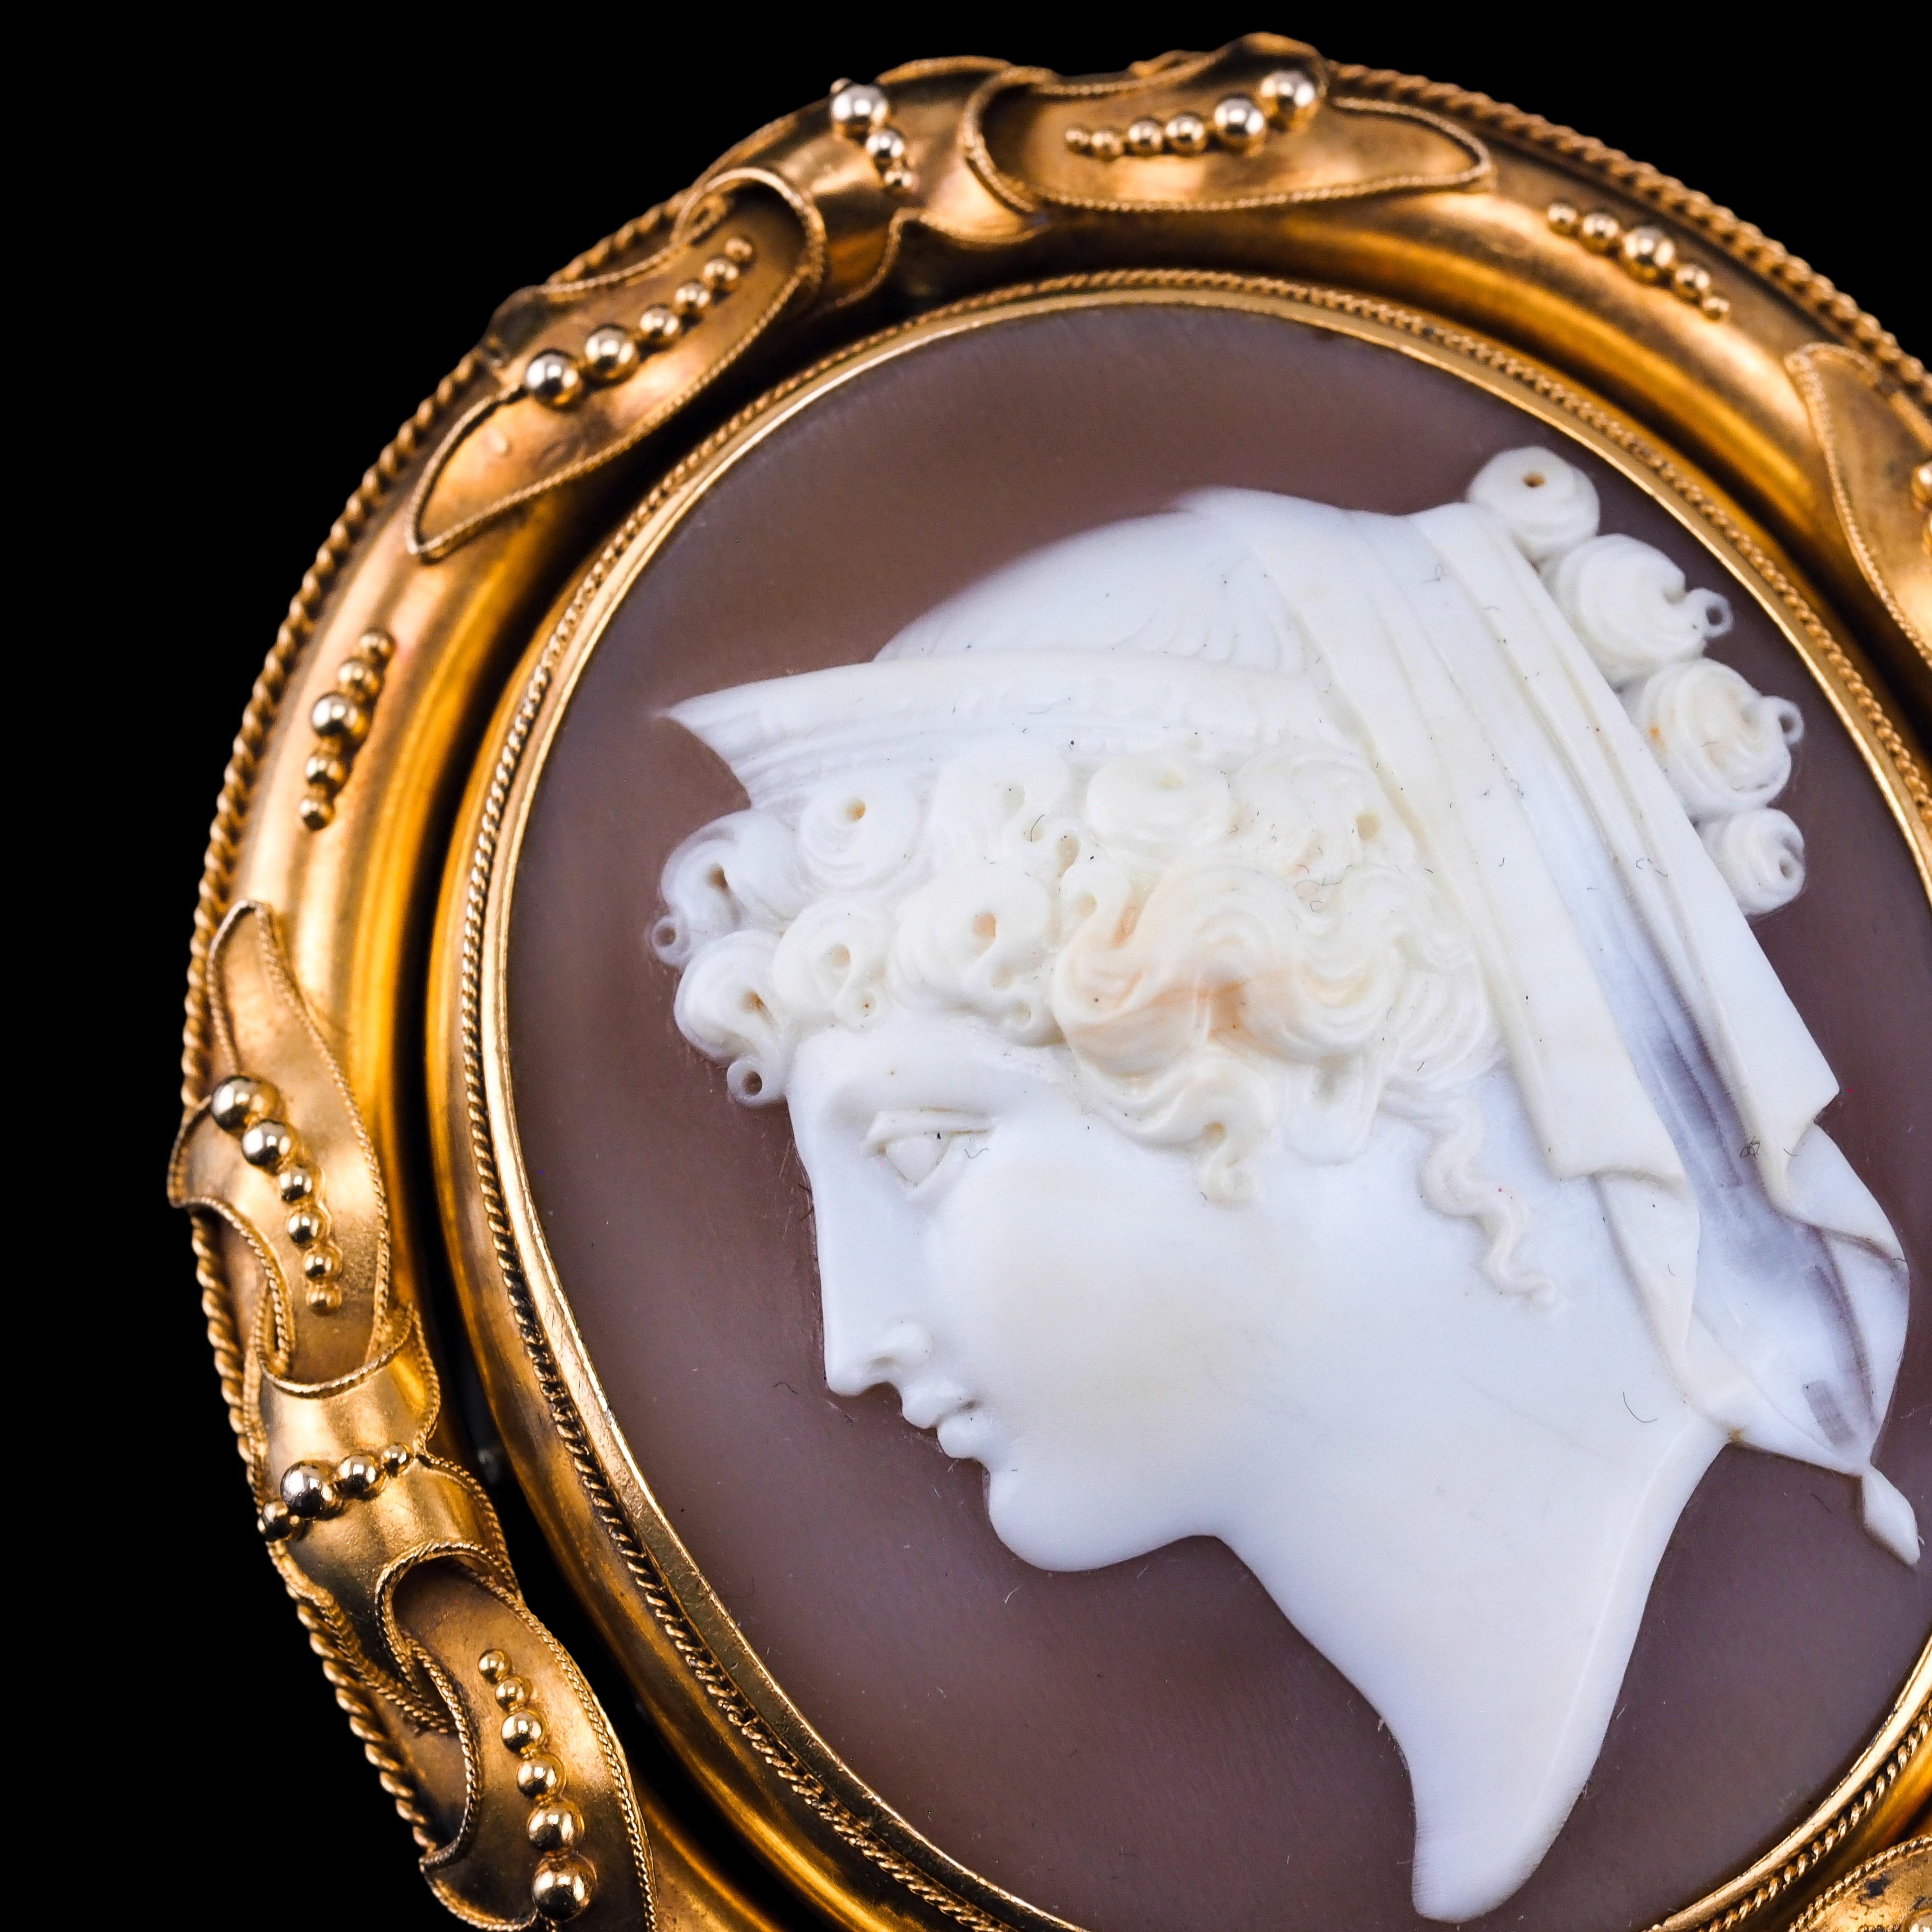 Antique Cameo Brooch Pendant Necklace 18K Gold - Victorian c.1860 For Sale 4